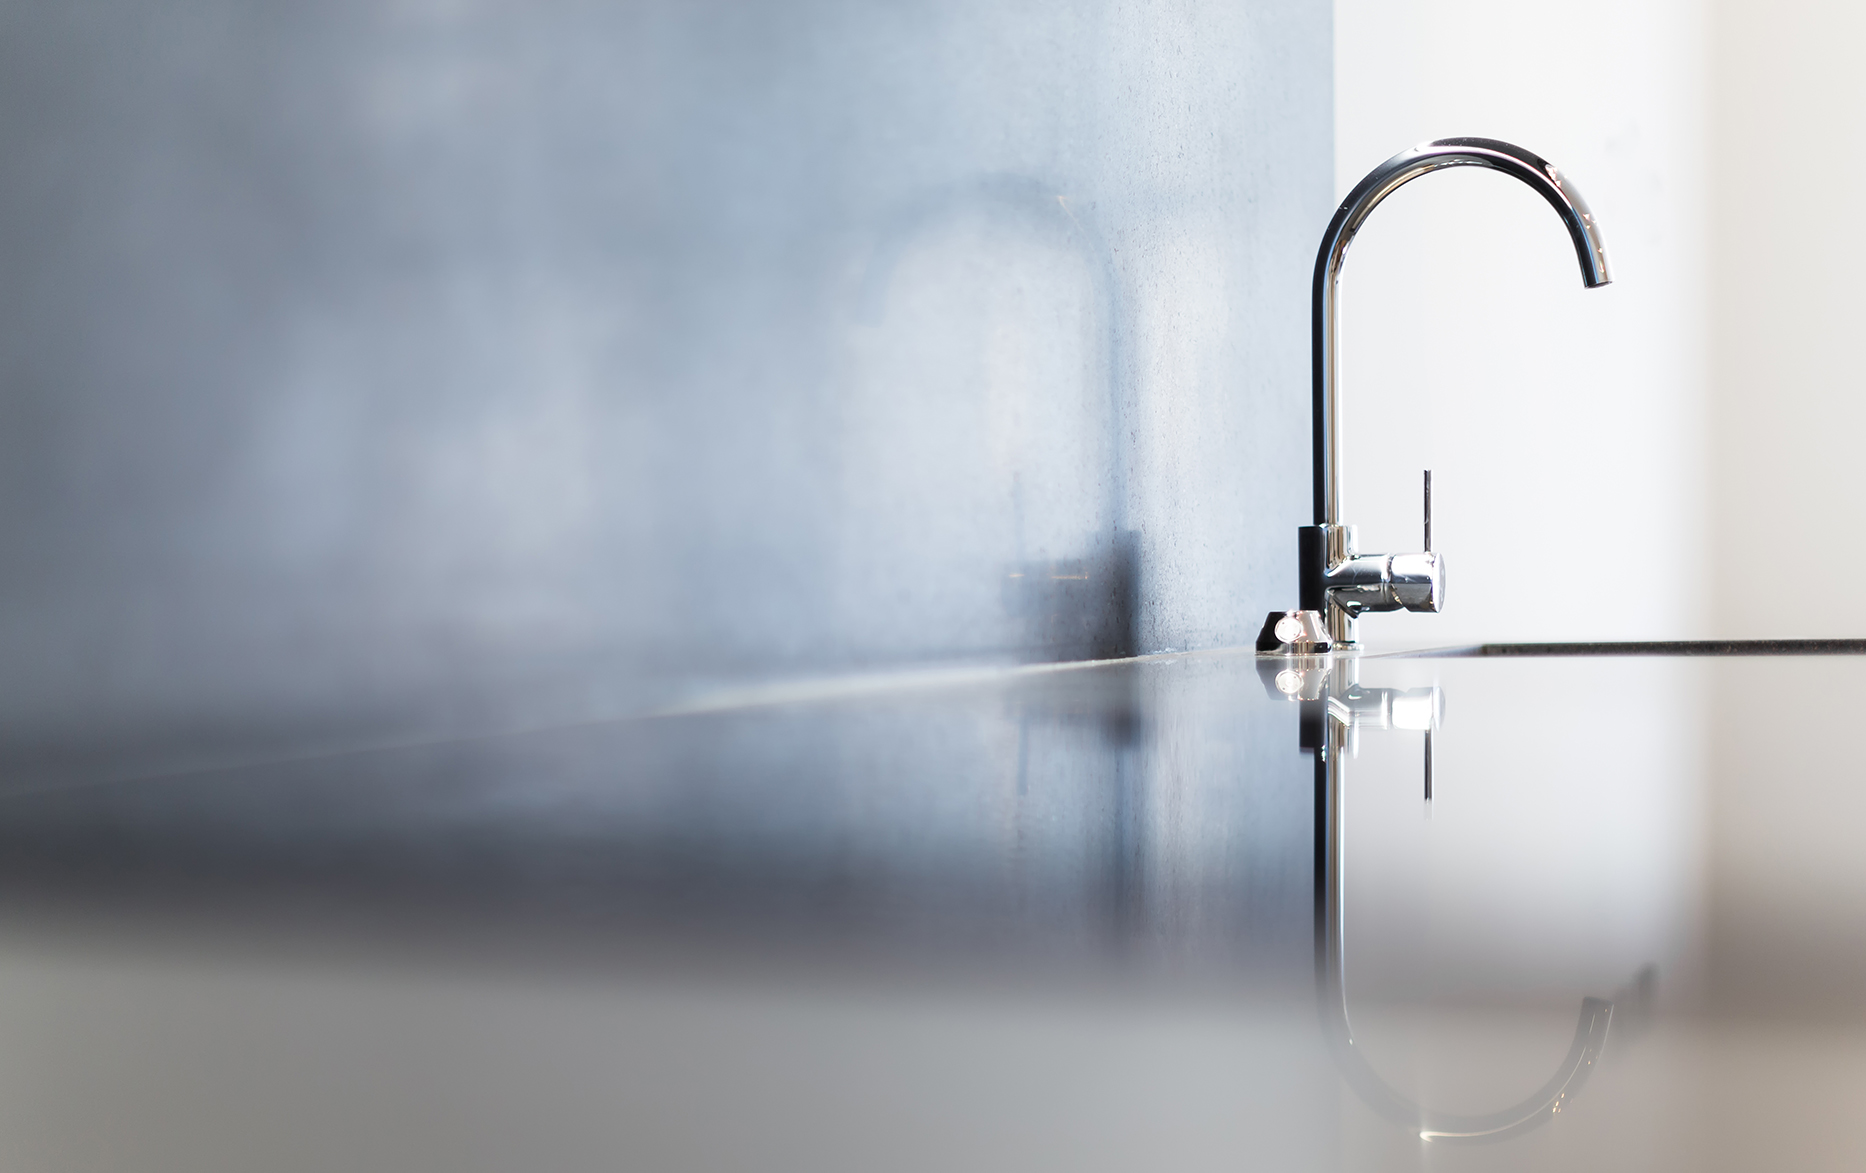 How to Clean Chrome Fixtures and Faucets